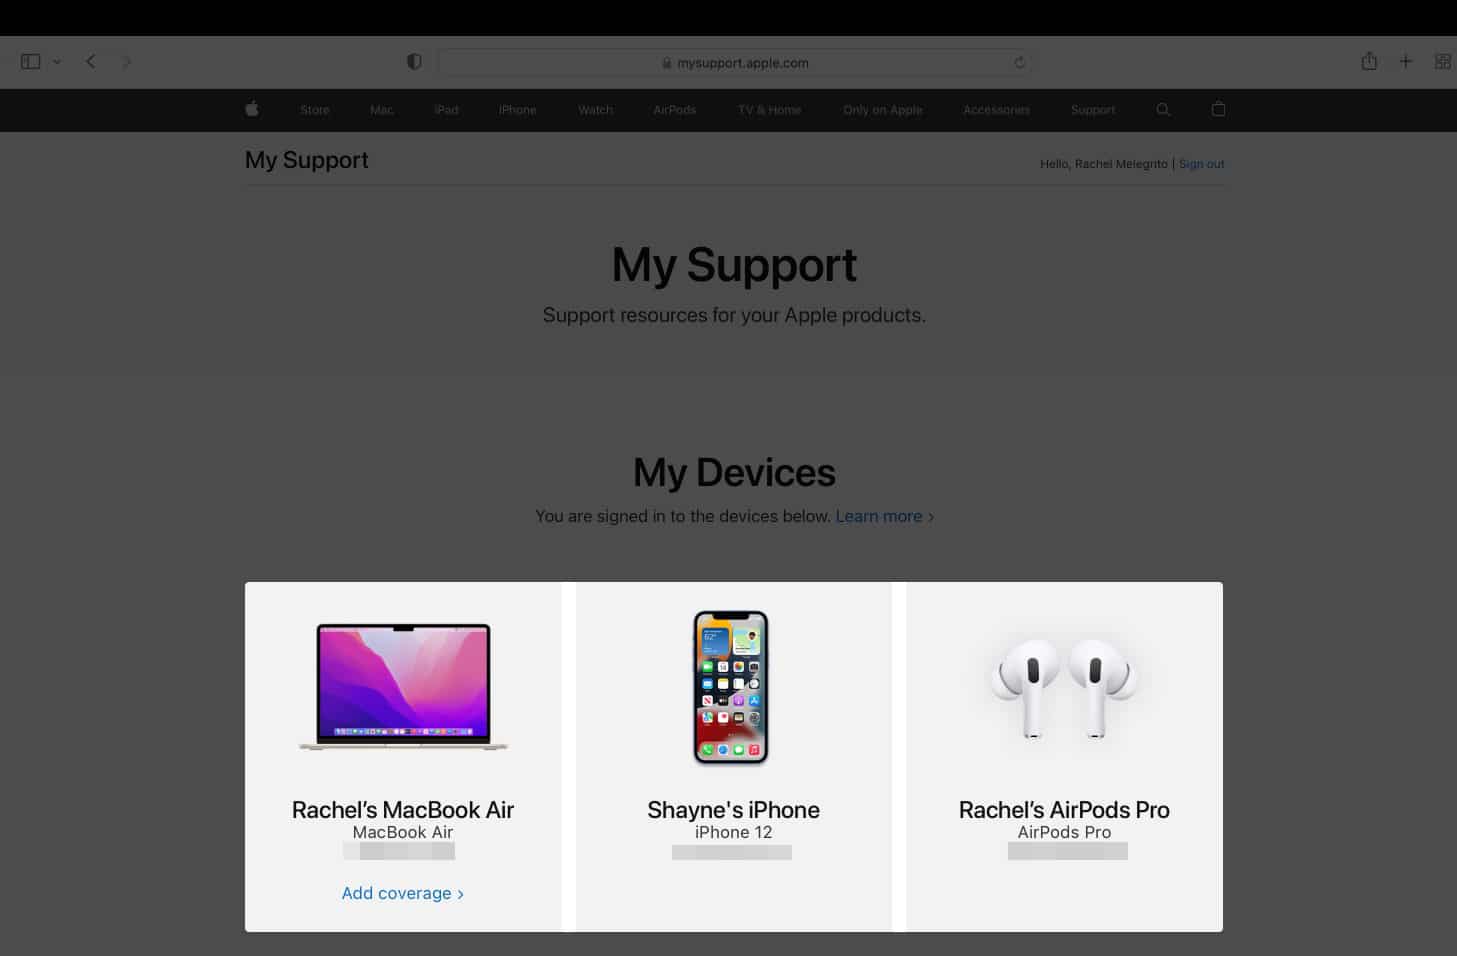 Waranty status of Apple Devices under My Devices on a Browser